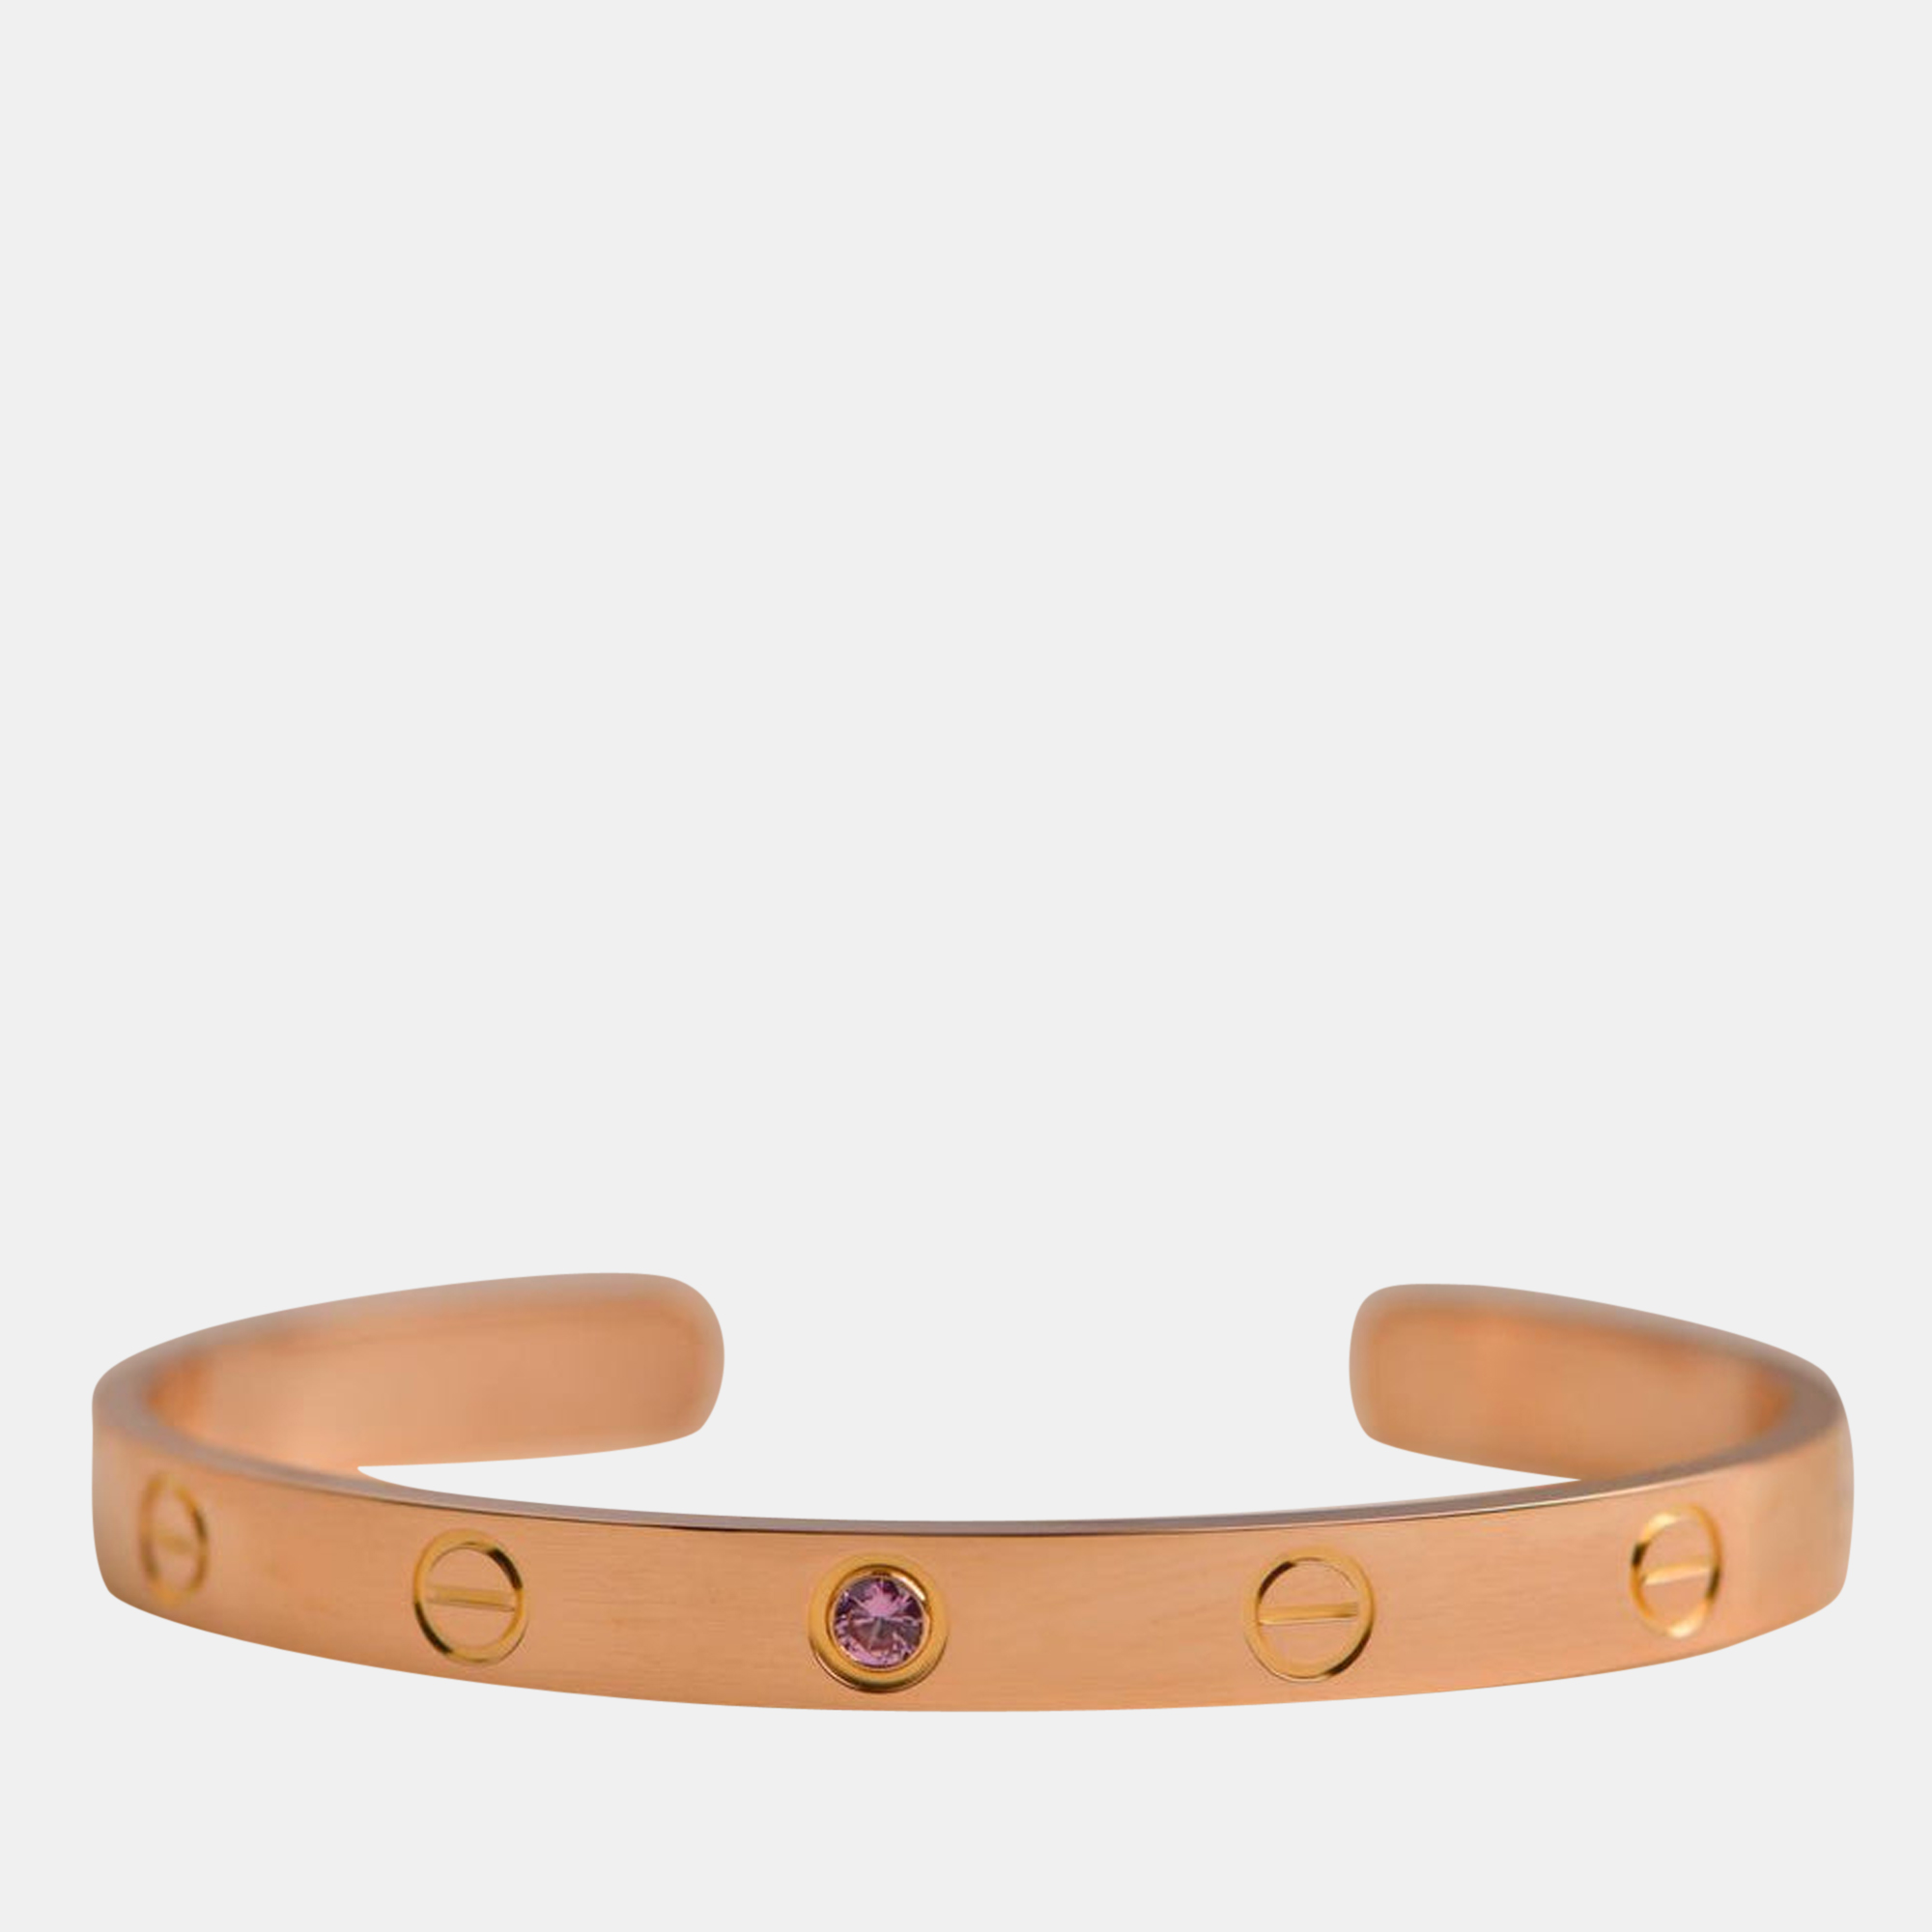 Cartiers Love bracelet is a modern symbol of luxury and a way to lock in ones love. Designed in an oval shape to comfortably sit around your wrist the iconic love handcuff is laid with distinct screw motifs and secured by screw closure.